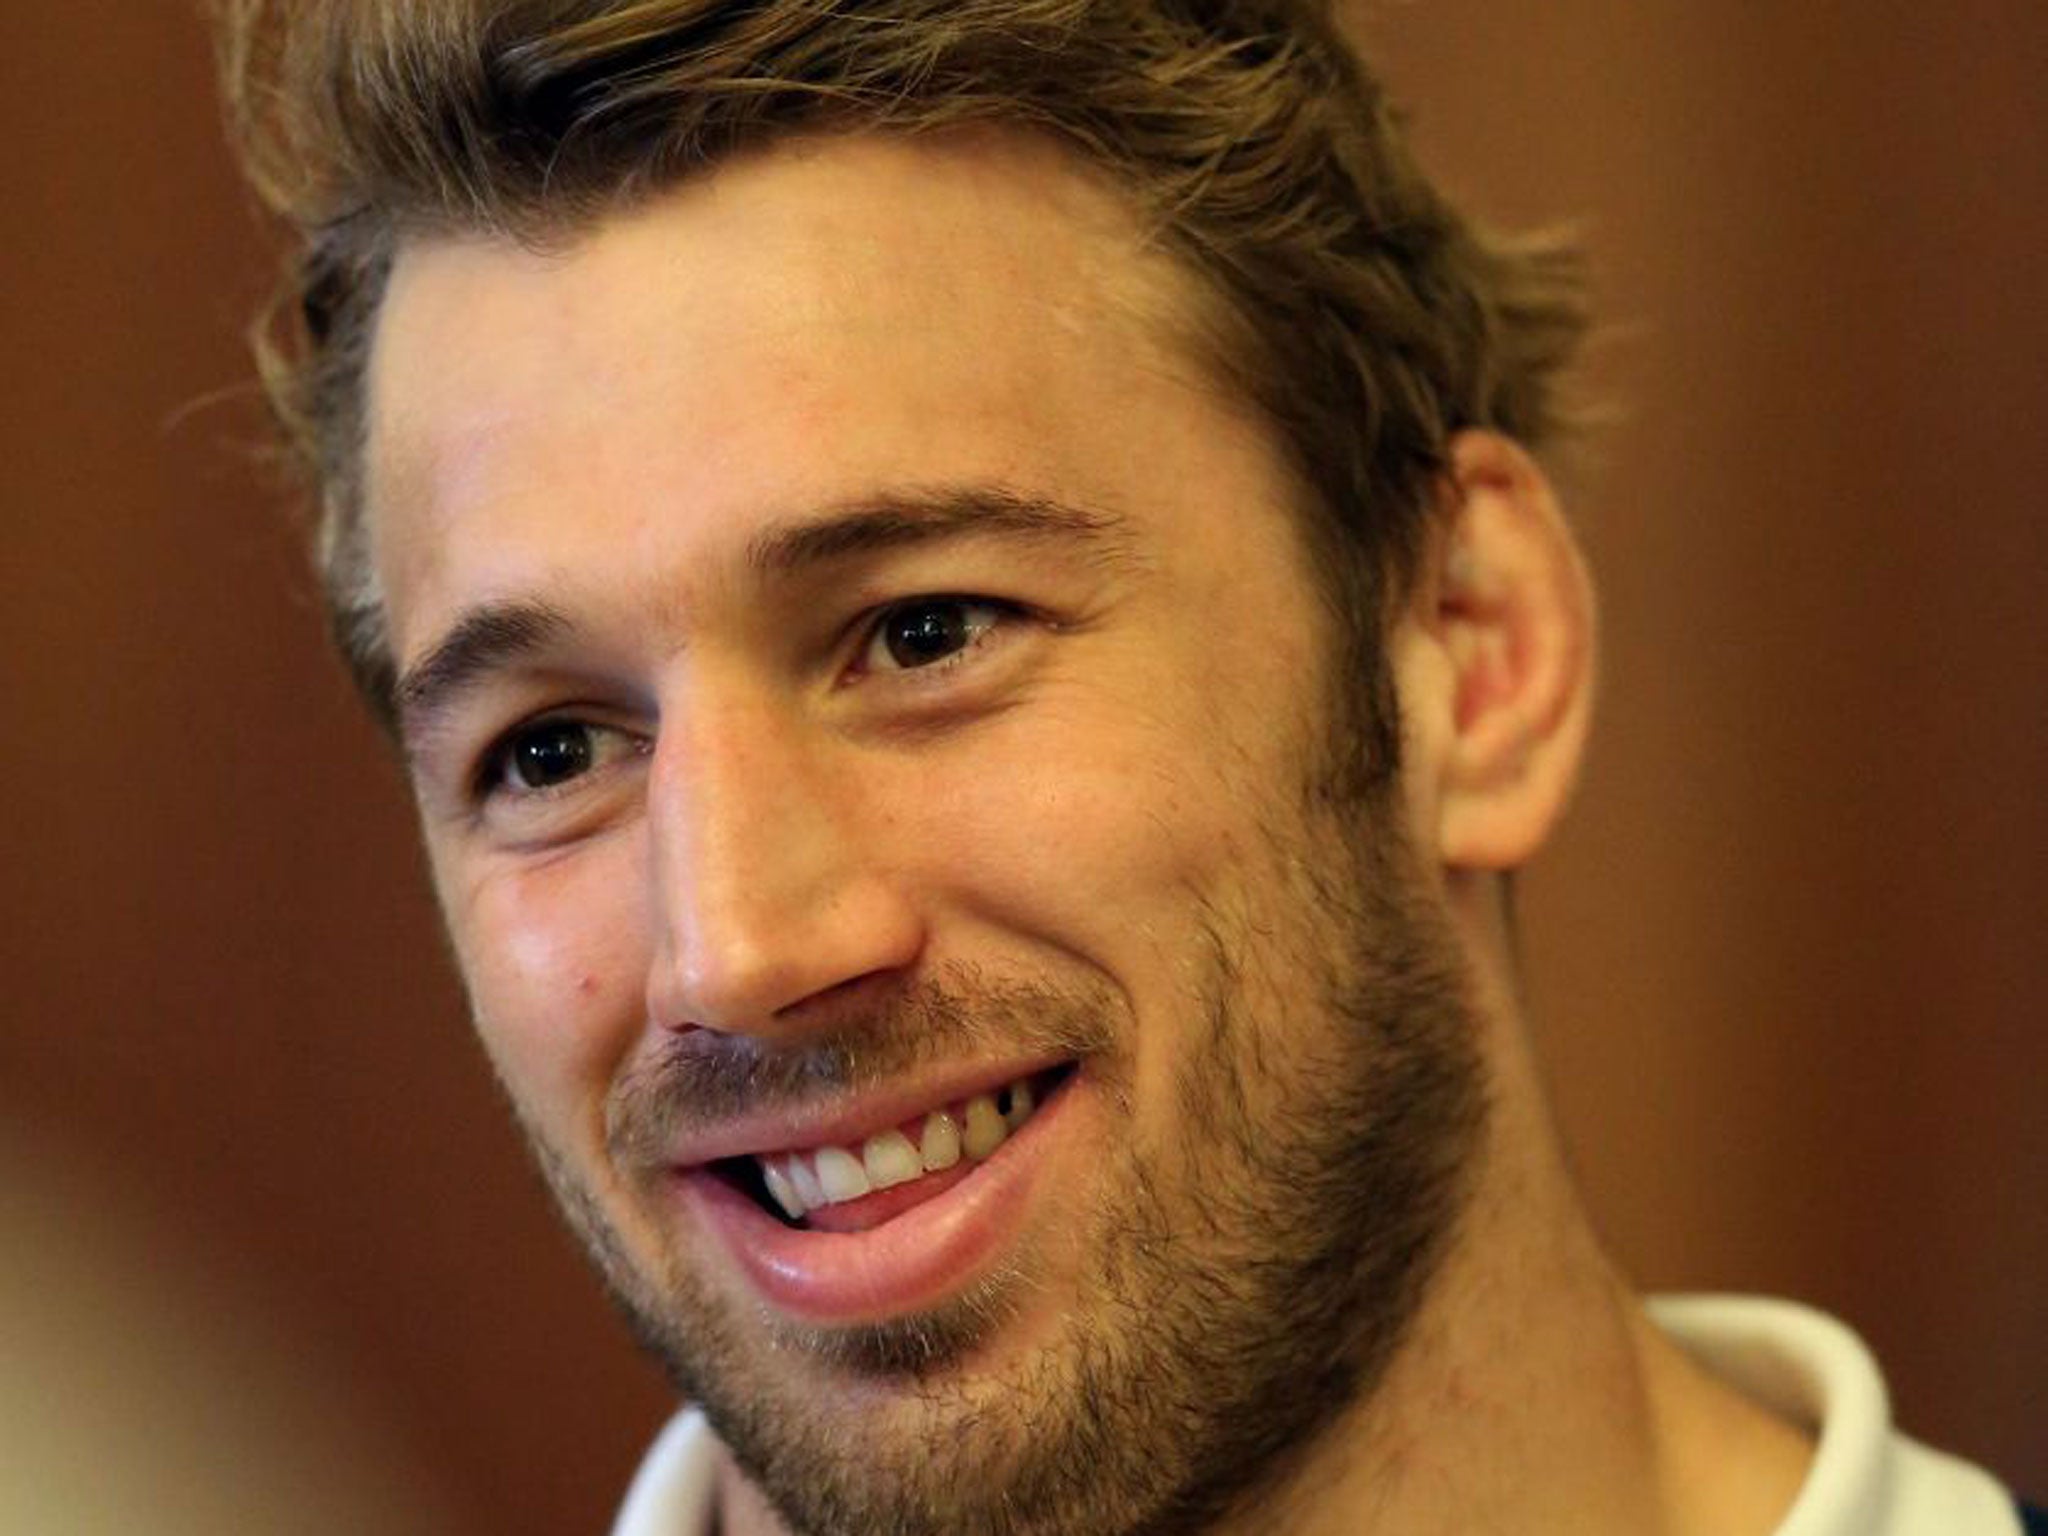 "That was the first time in my england career I’d found myself in a dark, negative place," Chris Robshaw